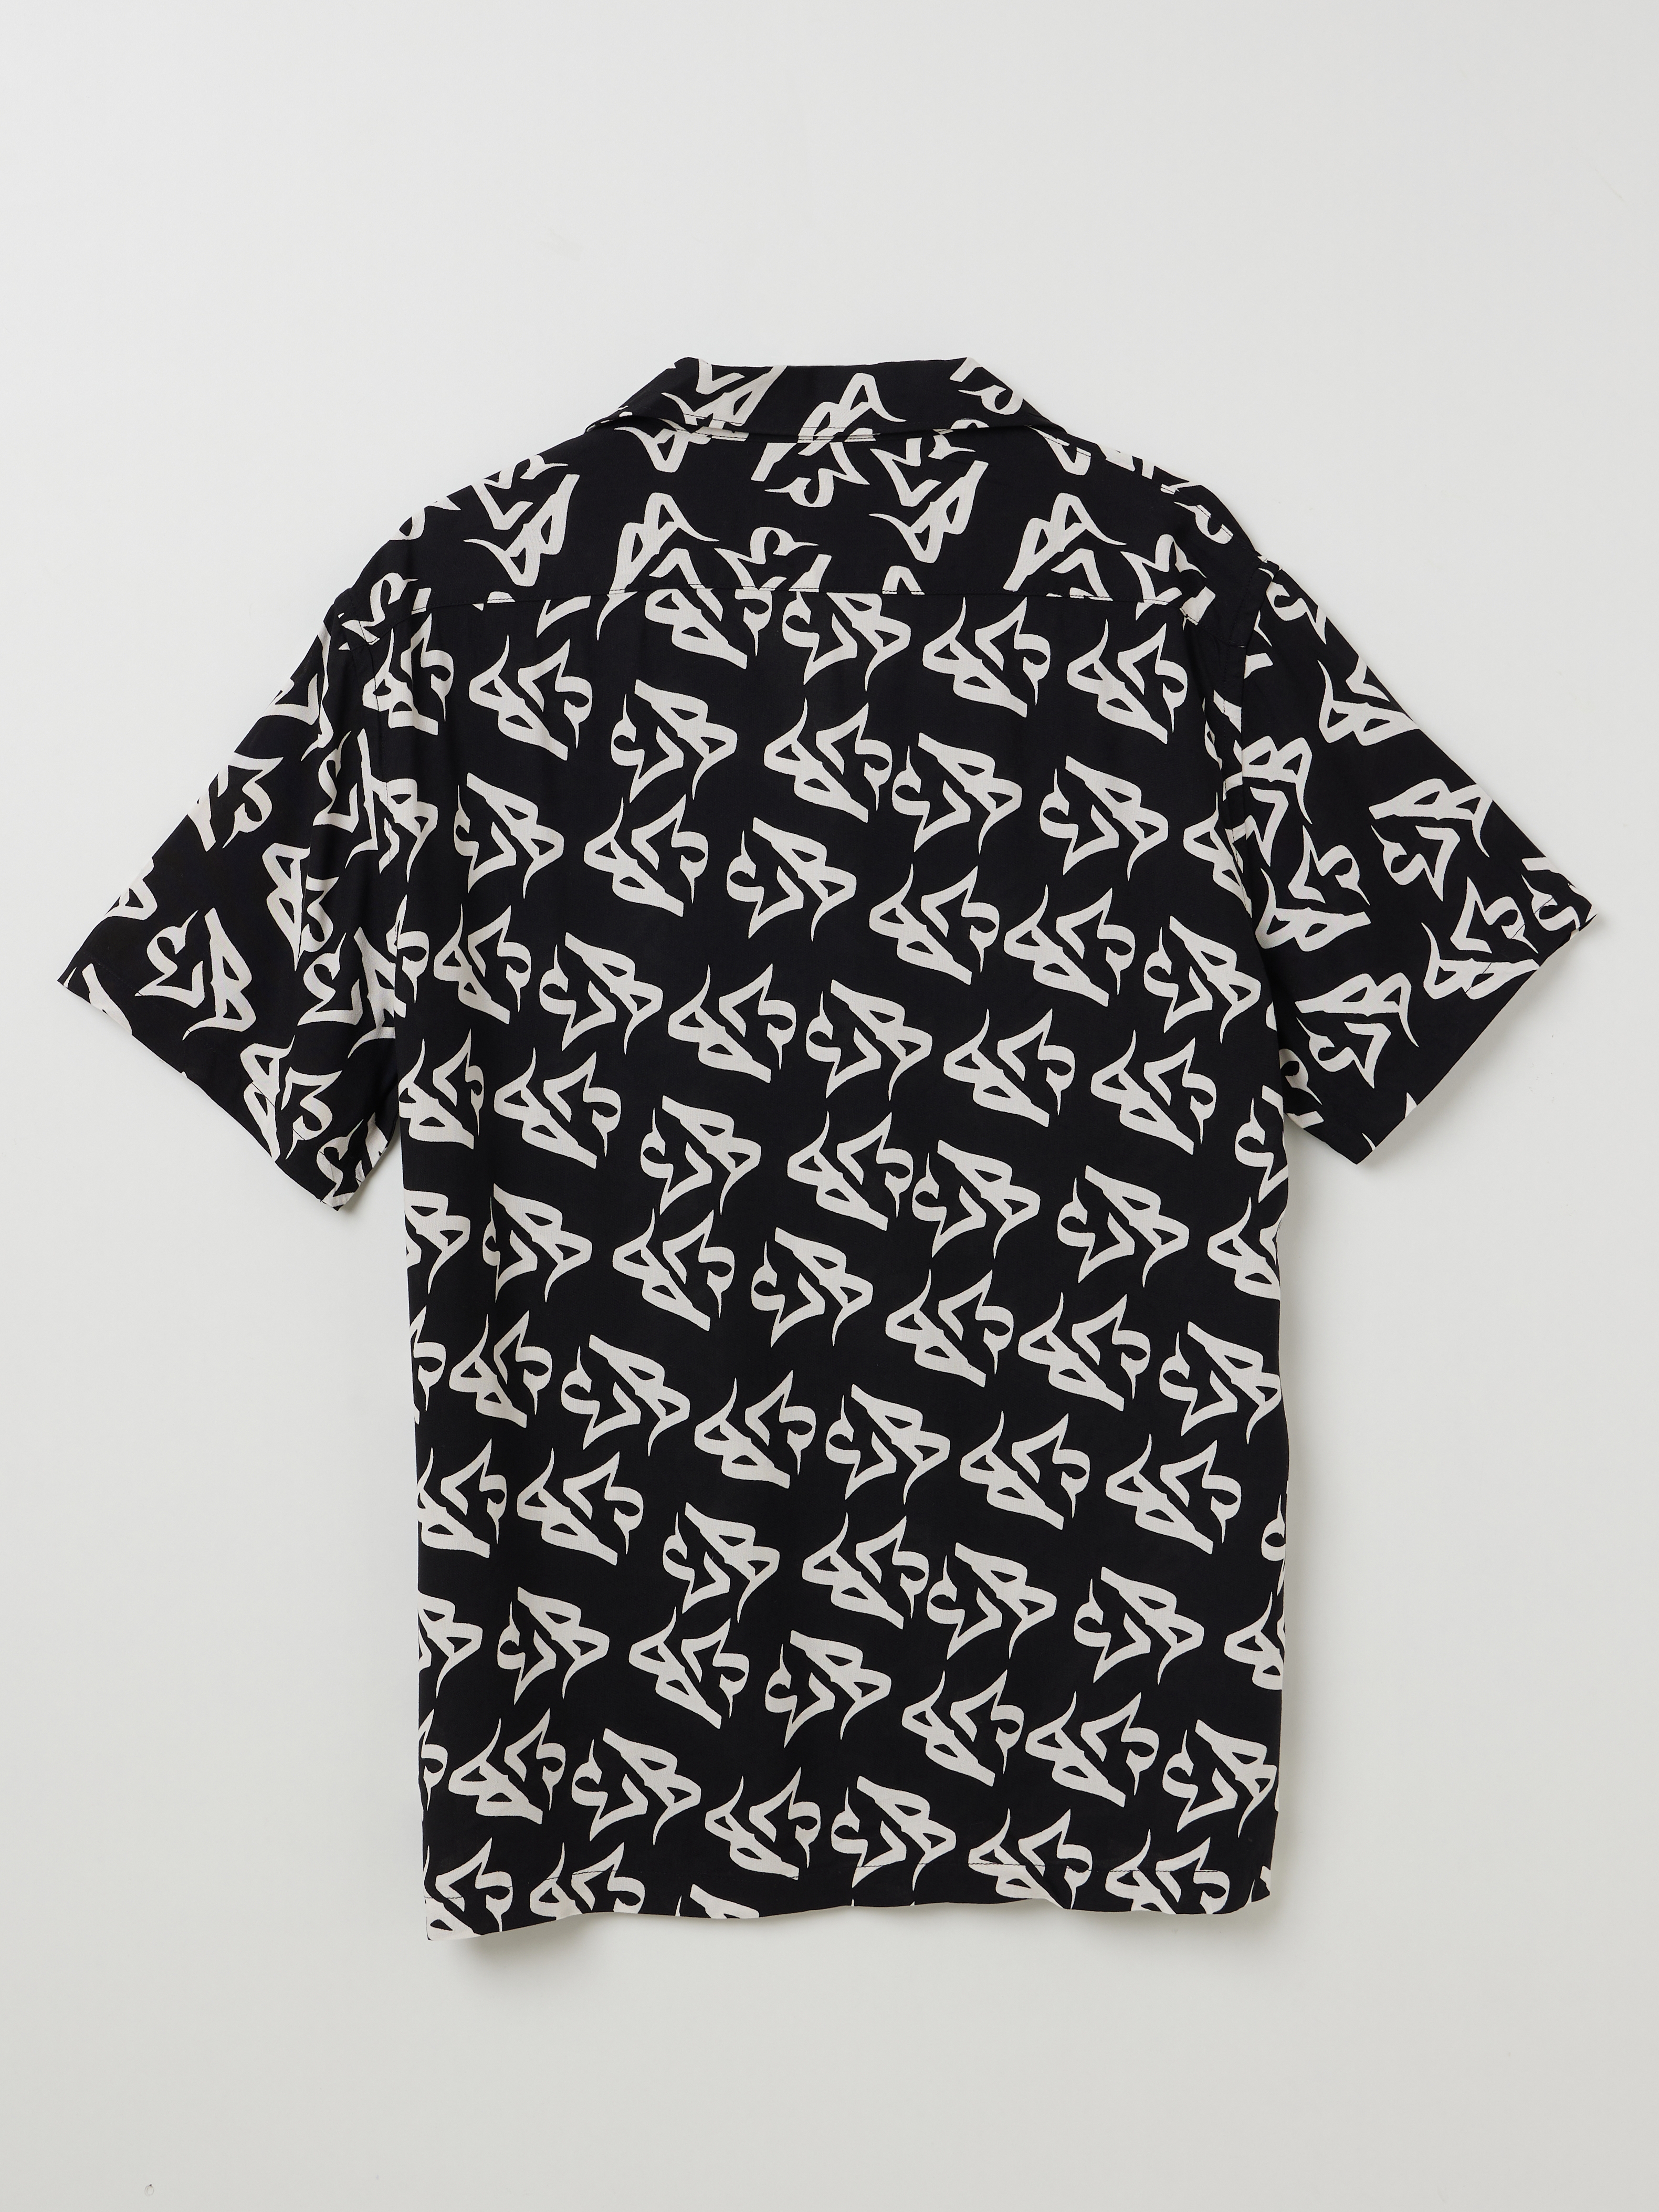 Men's Black and White Cotton Printed Casual Shirt